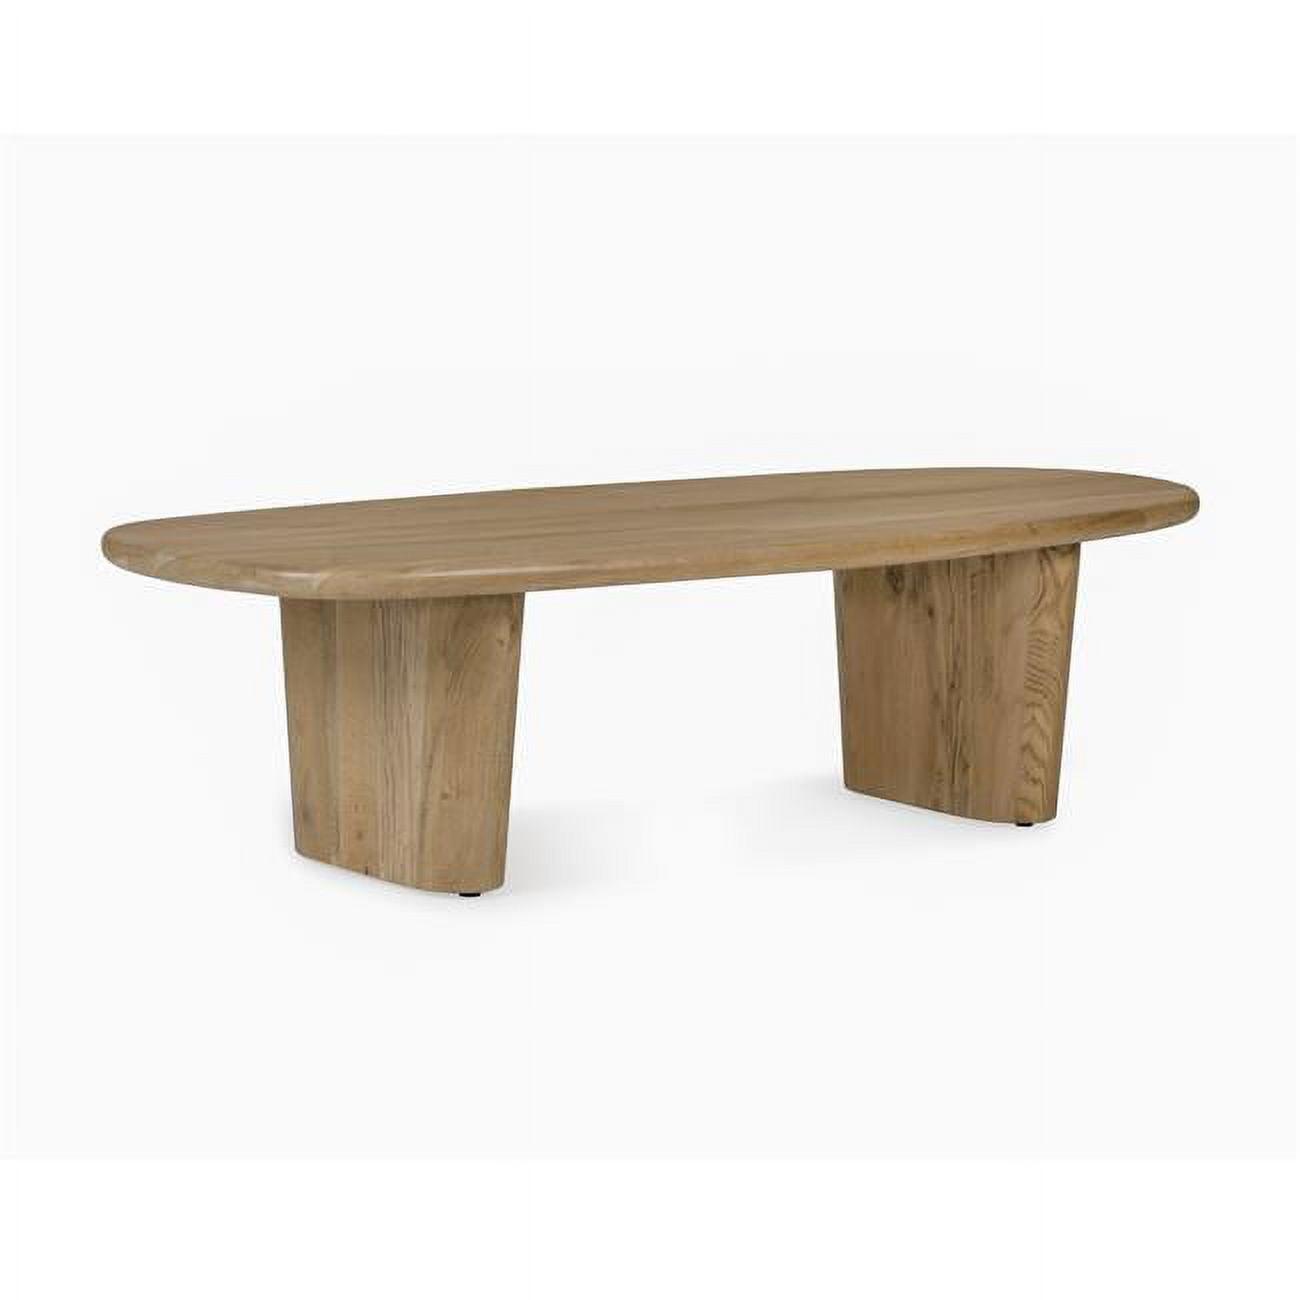 Laurel Round FSC Certified Oak Coffee Table with Natural Oil Finish